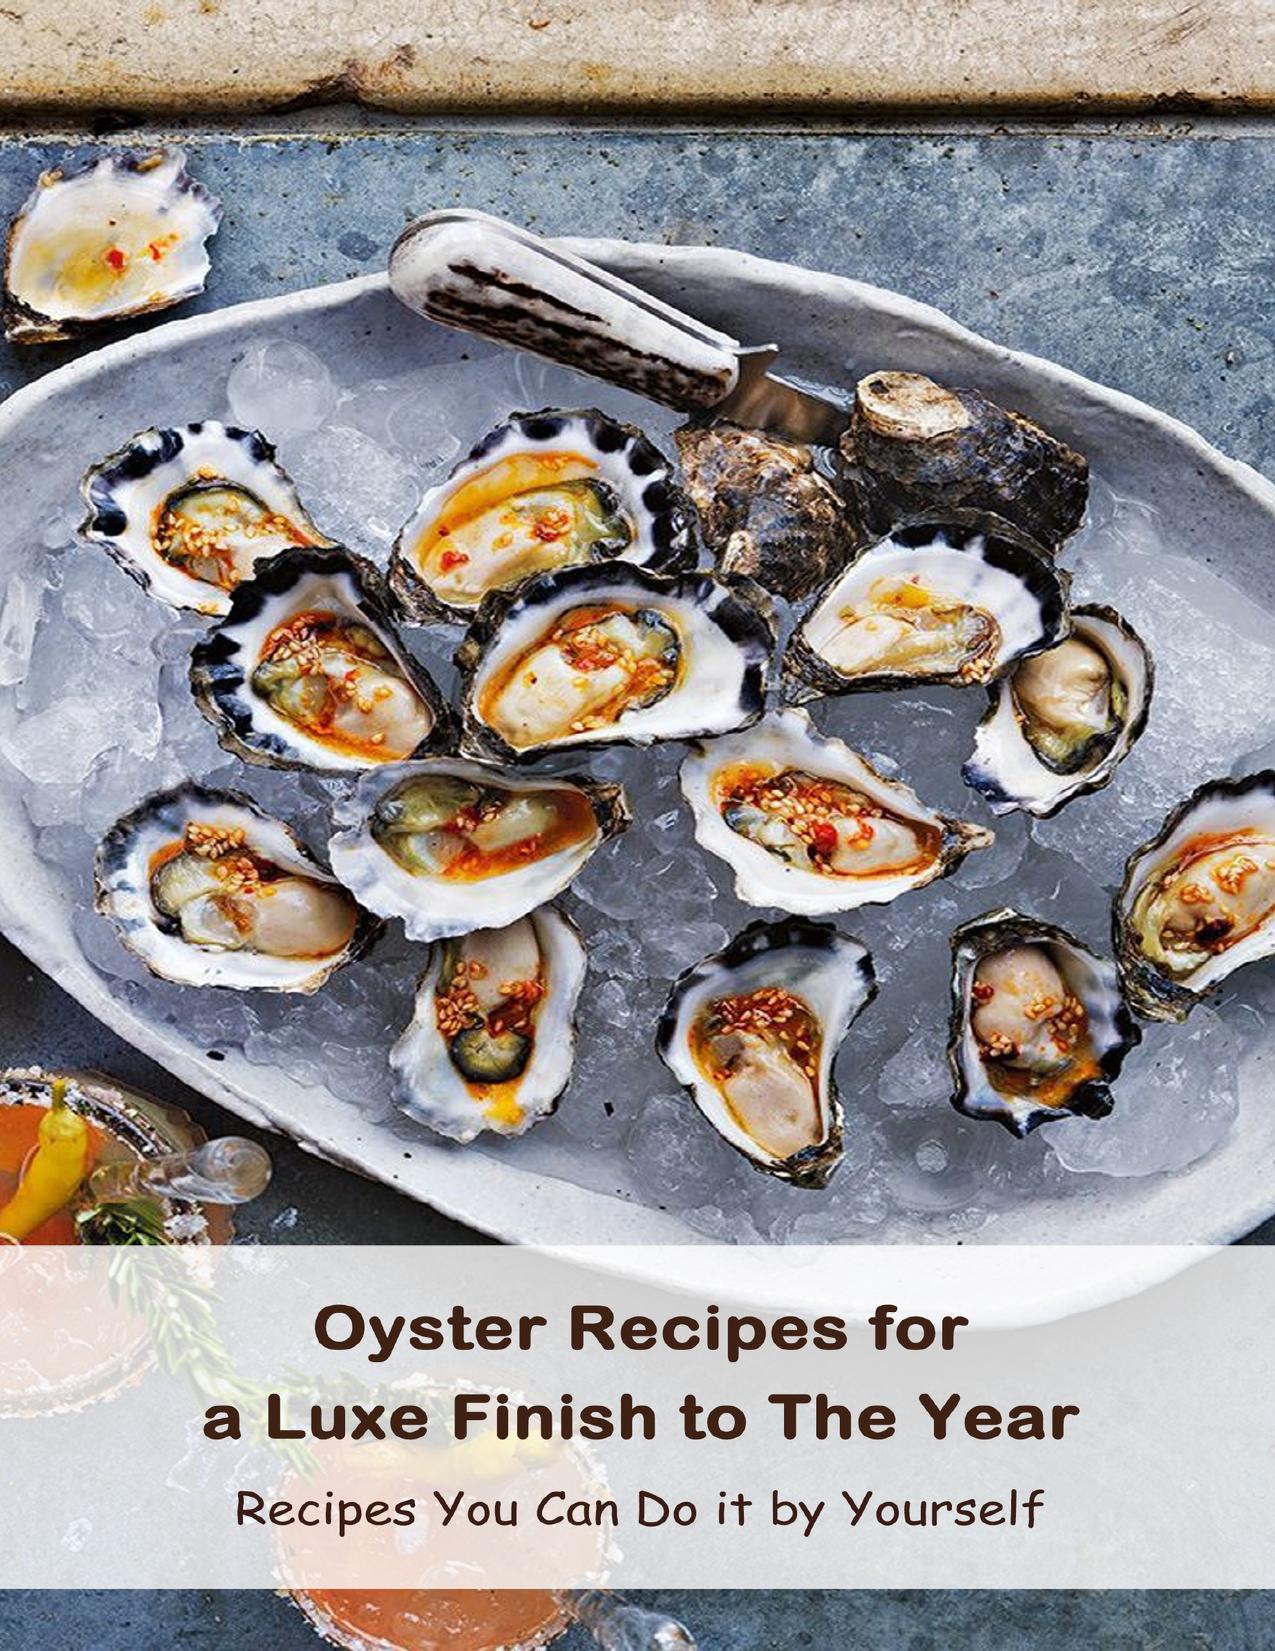 Oyster Recipes for a Luxe Finish to The Year: Recipes You Can Do it by Yourself: Tasty Oyster Recipes by Arvidson Benjamin